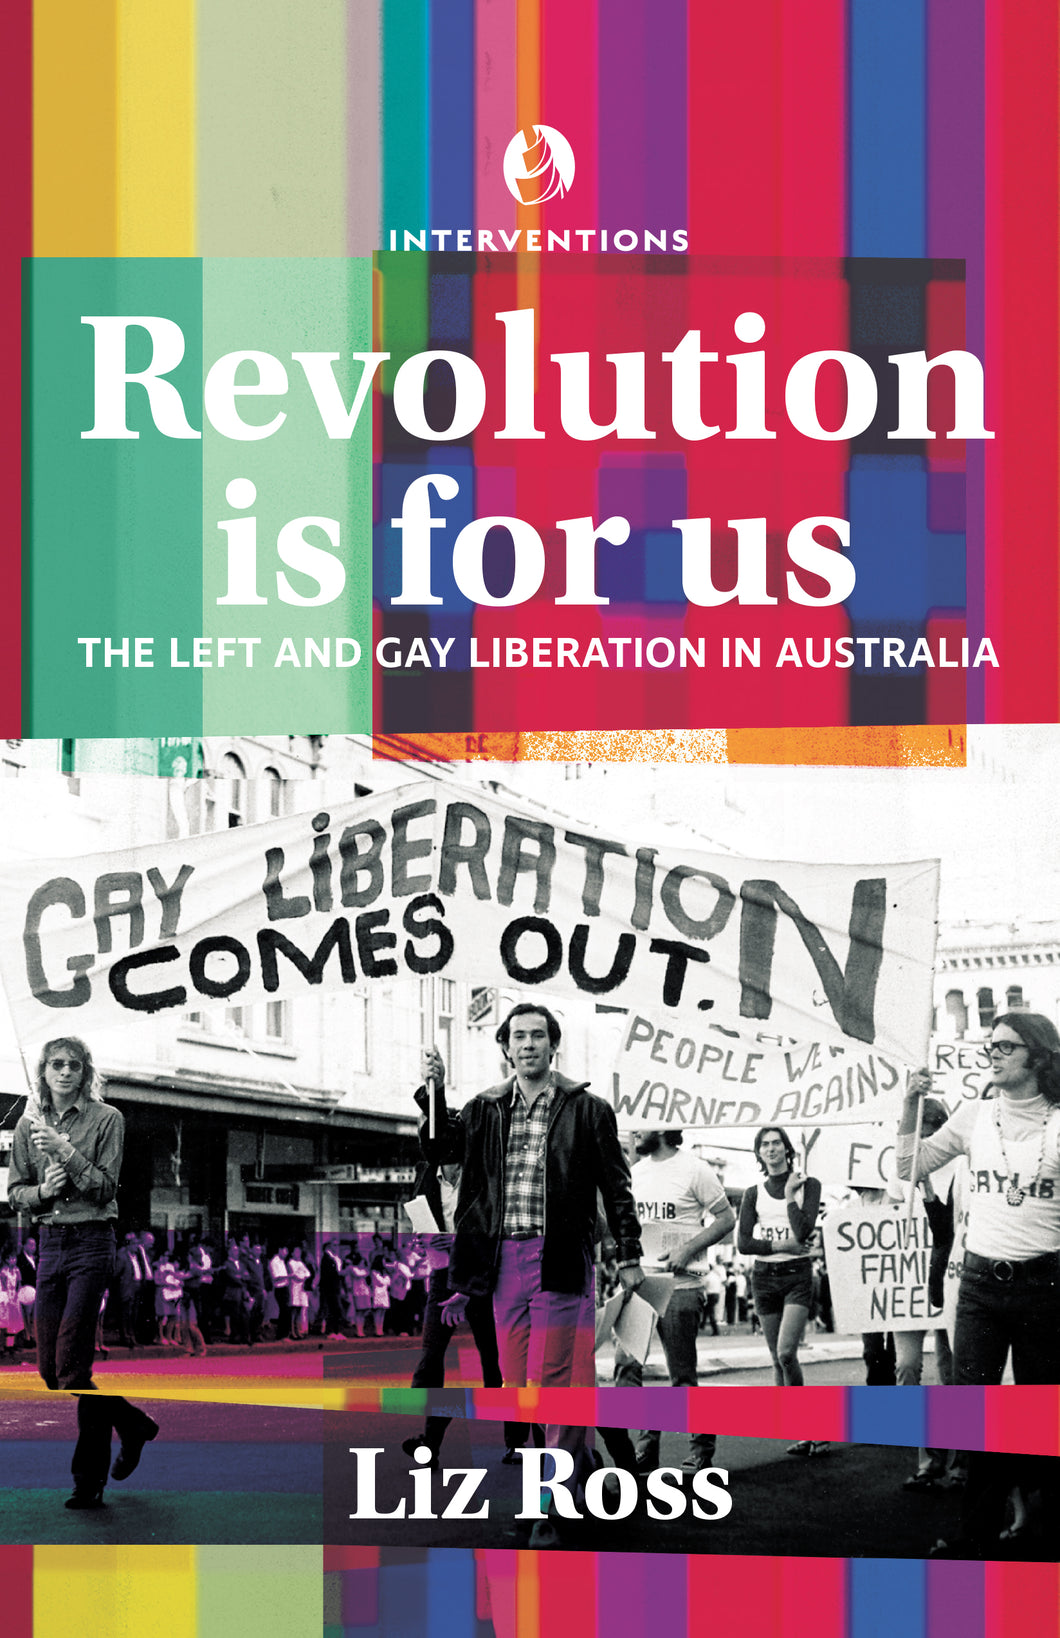 Revolution is for us: The left and gay liberation in Australia